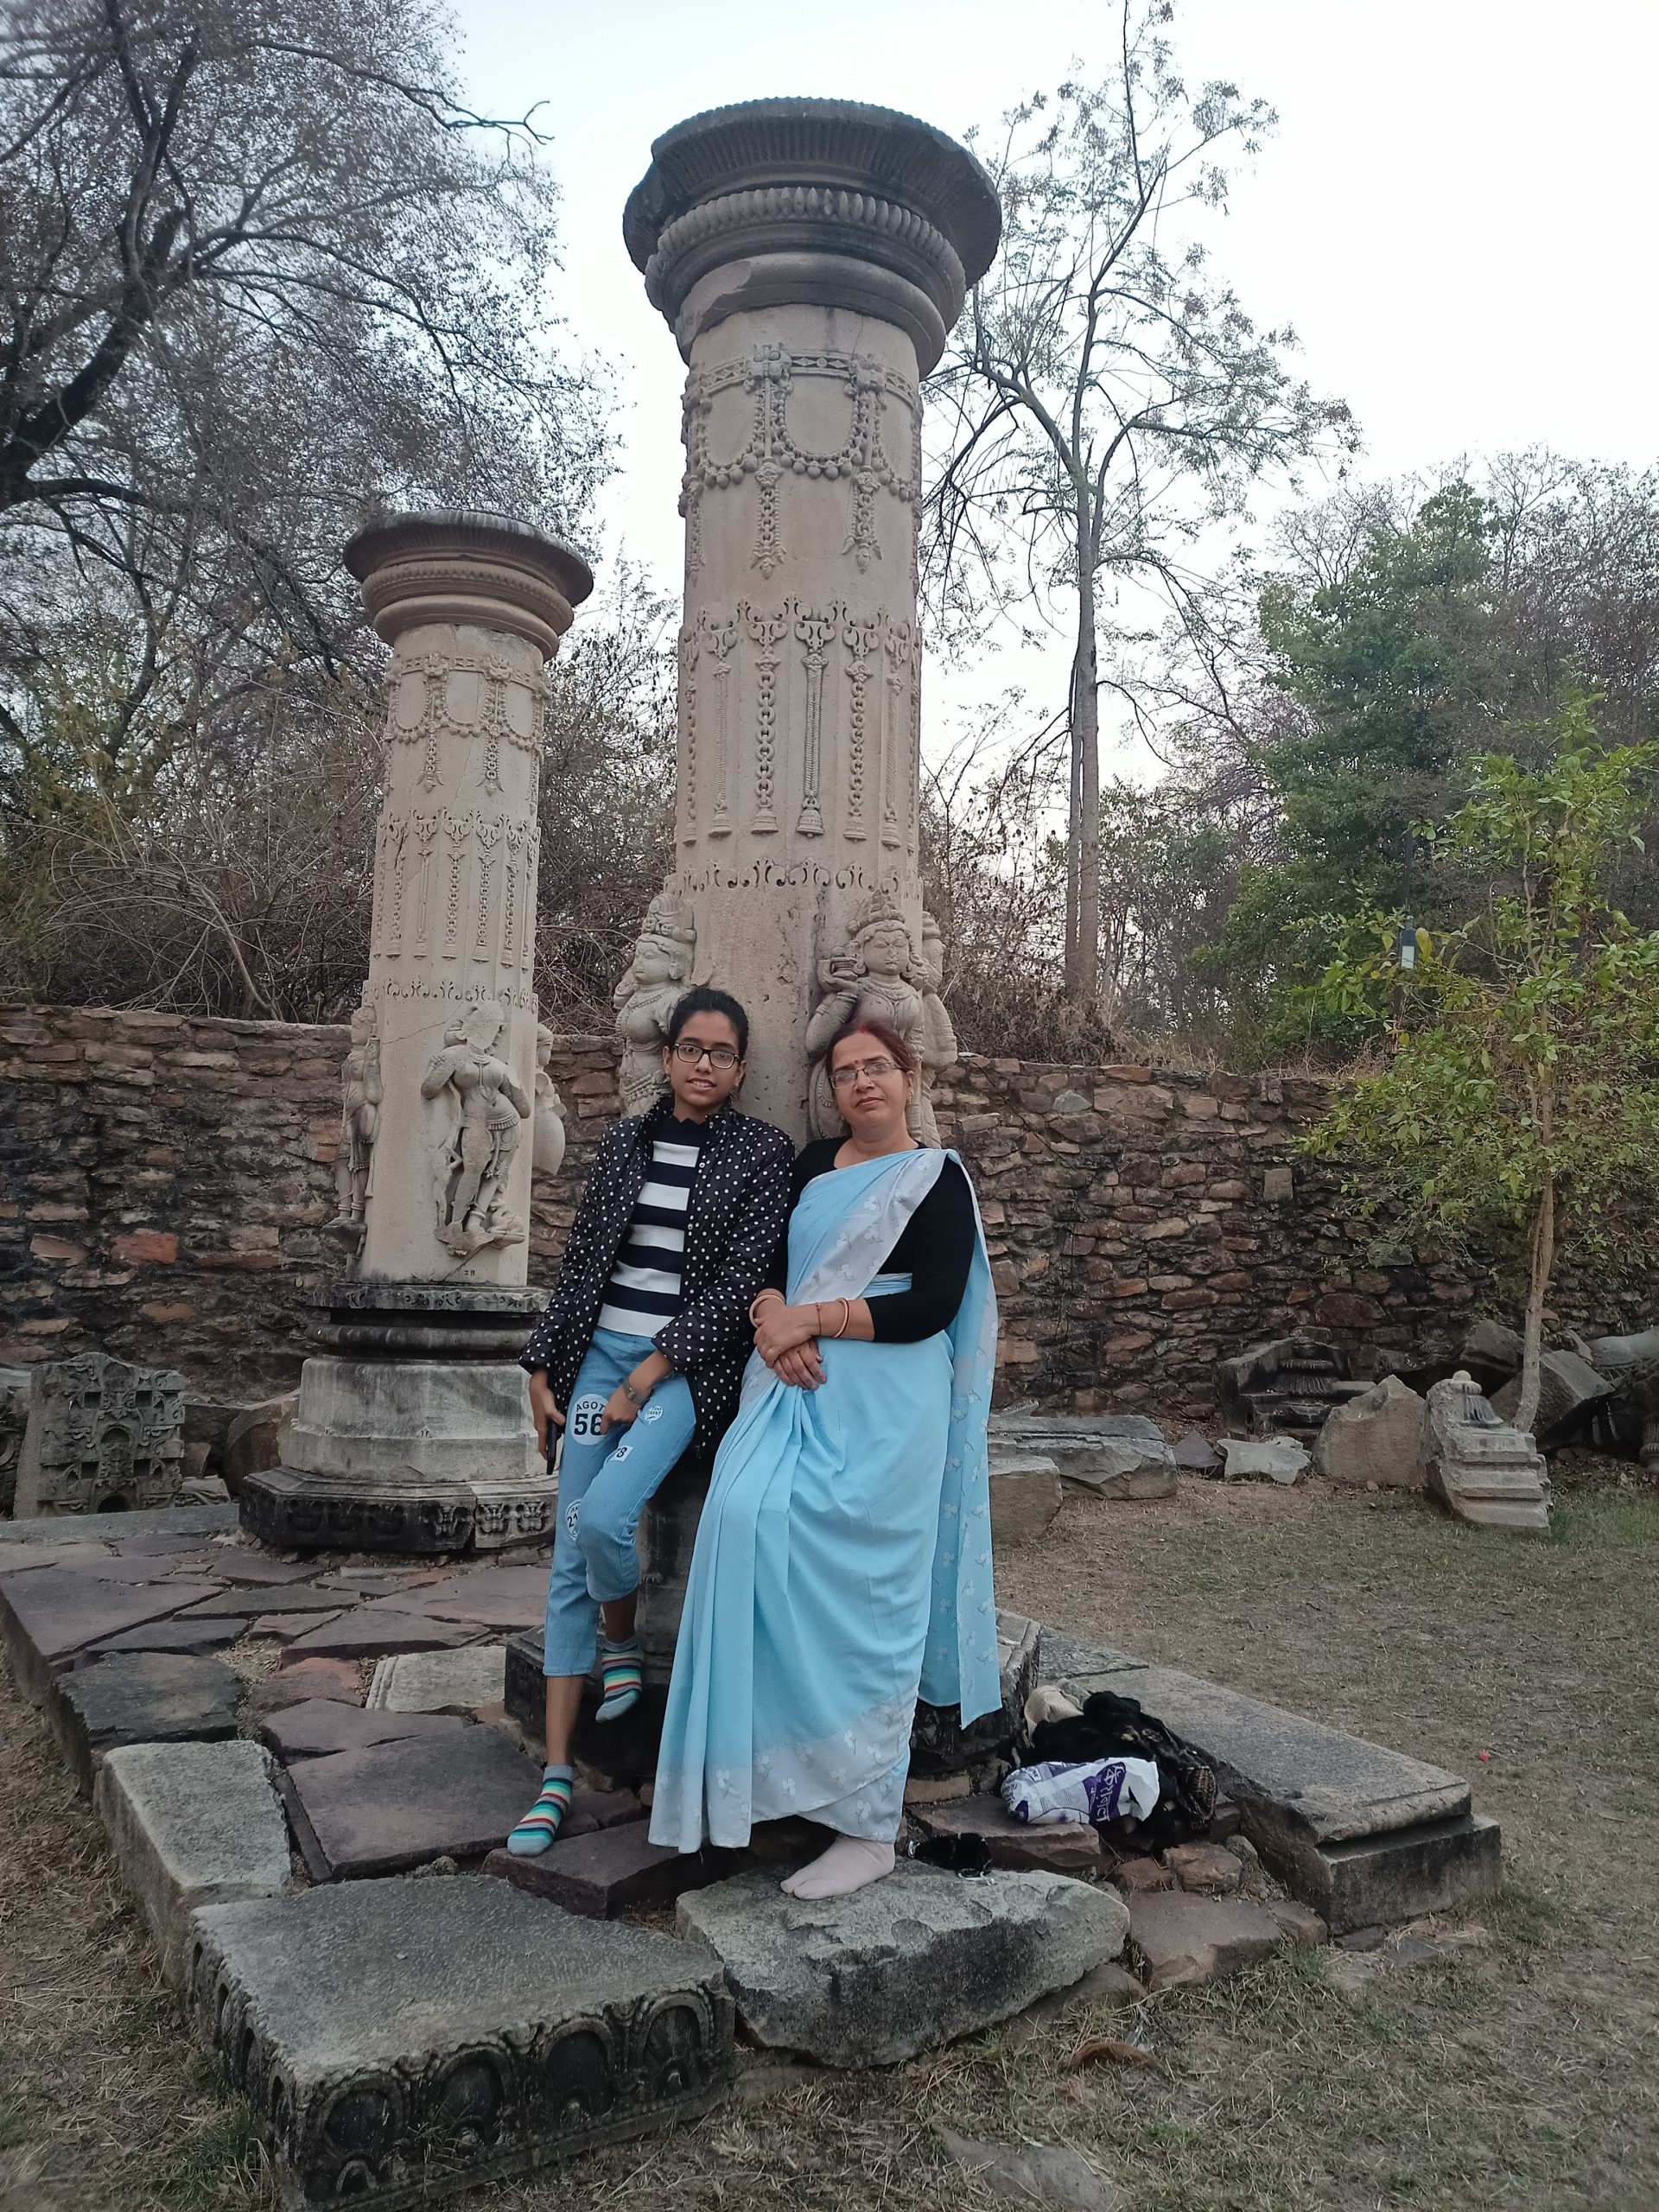 Mother and daughter at a historic place